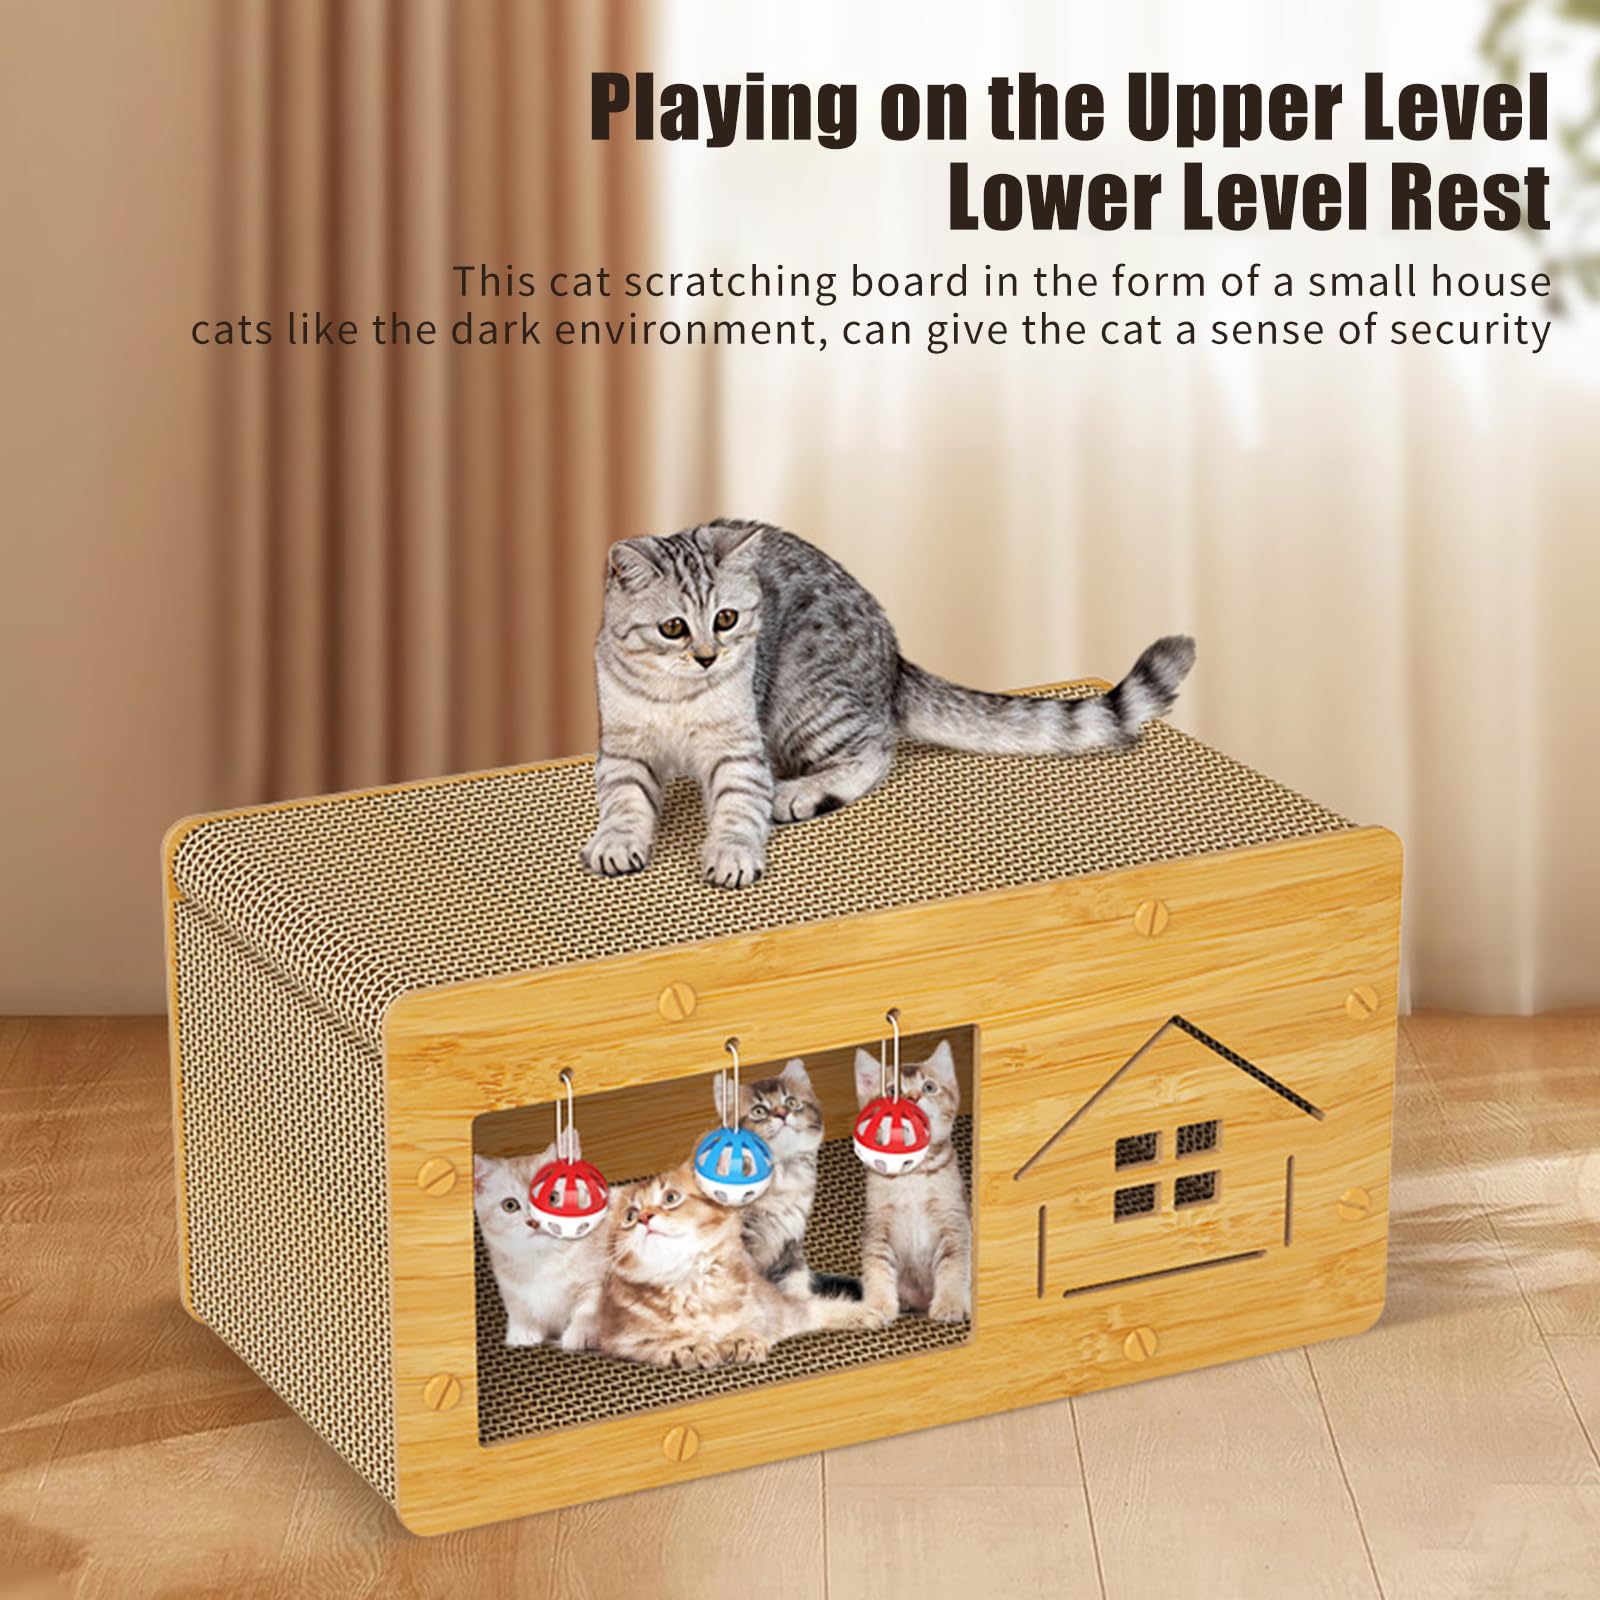 Aheyimcn Cat Scratcher House, Wooden Cat Scratcher House with Cat Cardboard Pad with Ball with Bell, Large Space Let Your Kitties Scratch, Play, & Rest Cardboard Cat House Easy to Assemble (Large)